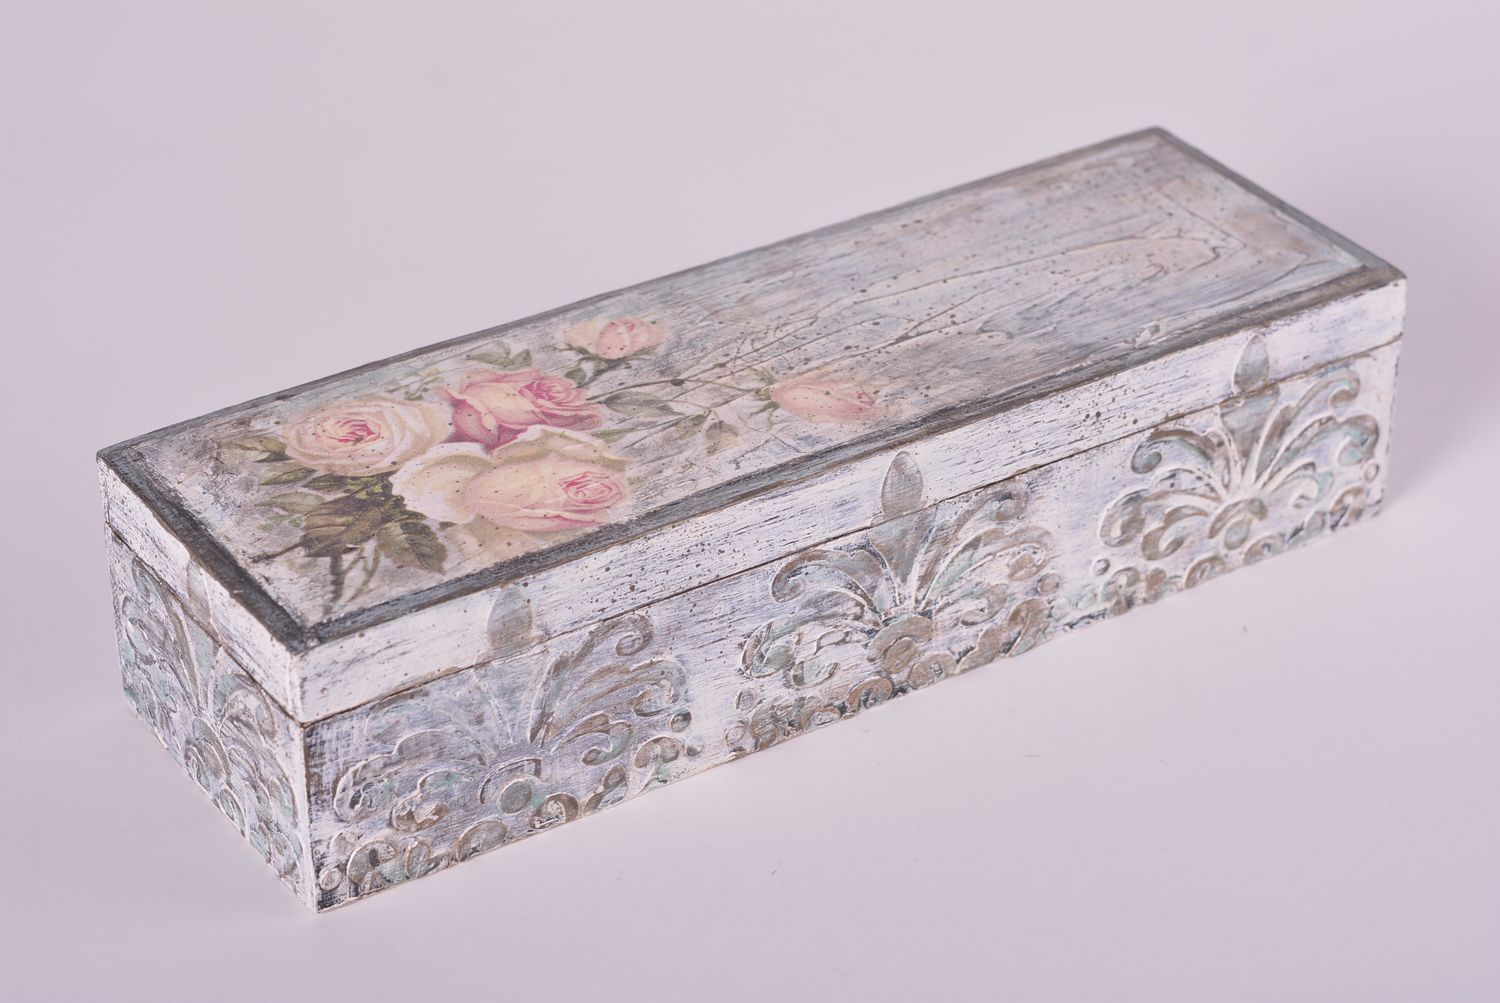 Handmade wooden jewelry box with decoupage home organizer decorative use only photo 1